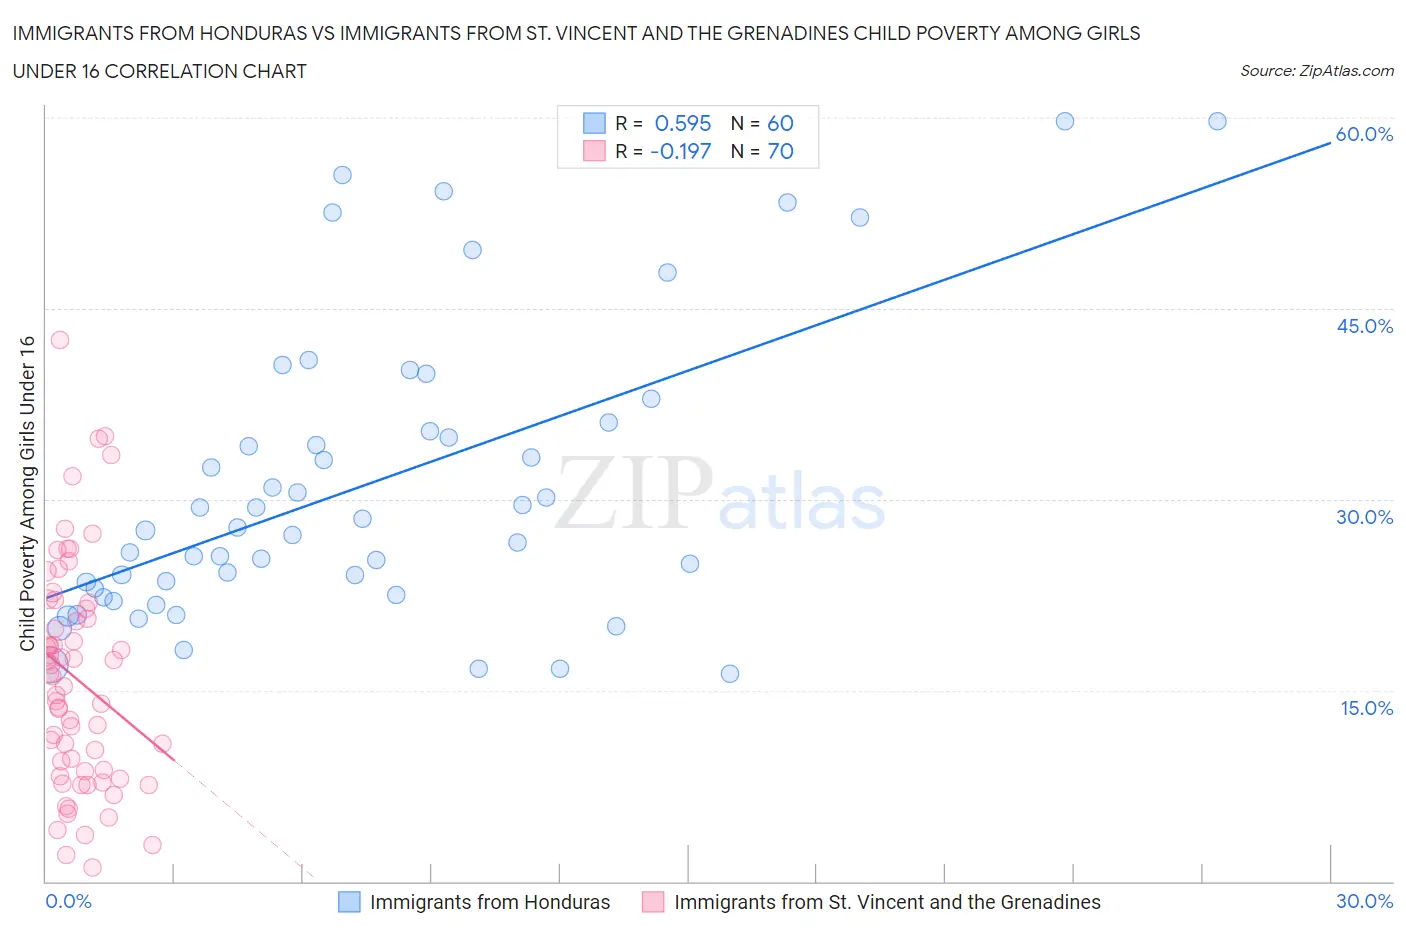 Immigrants from Honduras vs Immigrants from St. Vincent and the Grenadines Child Poverty Among Girls Under 16